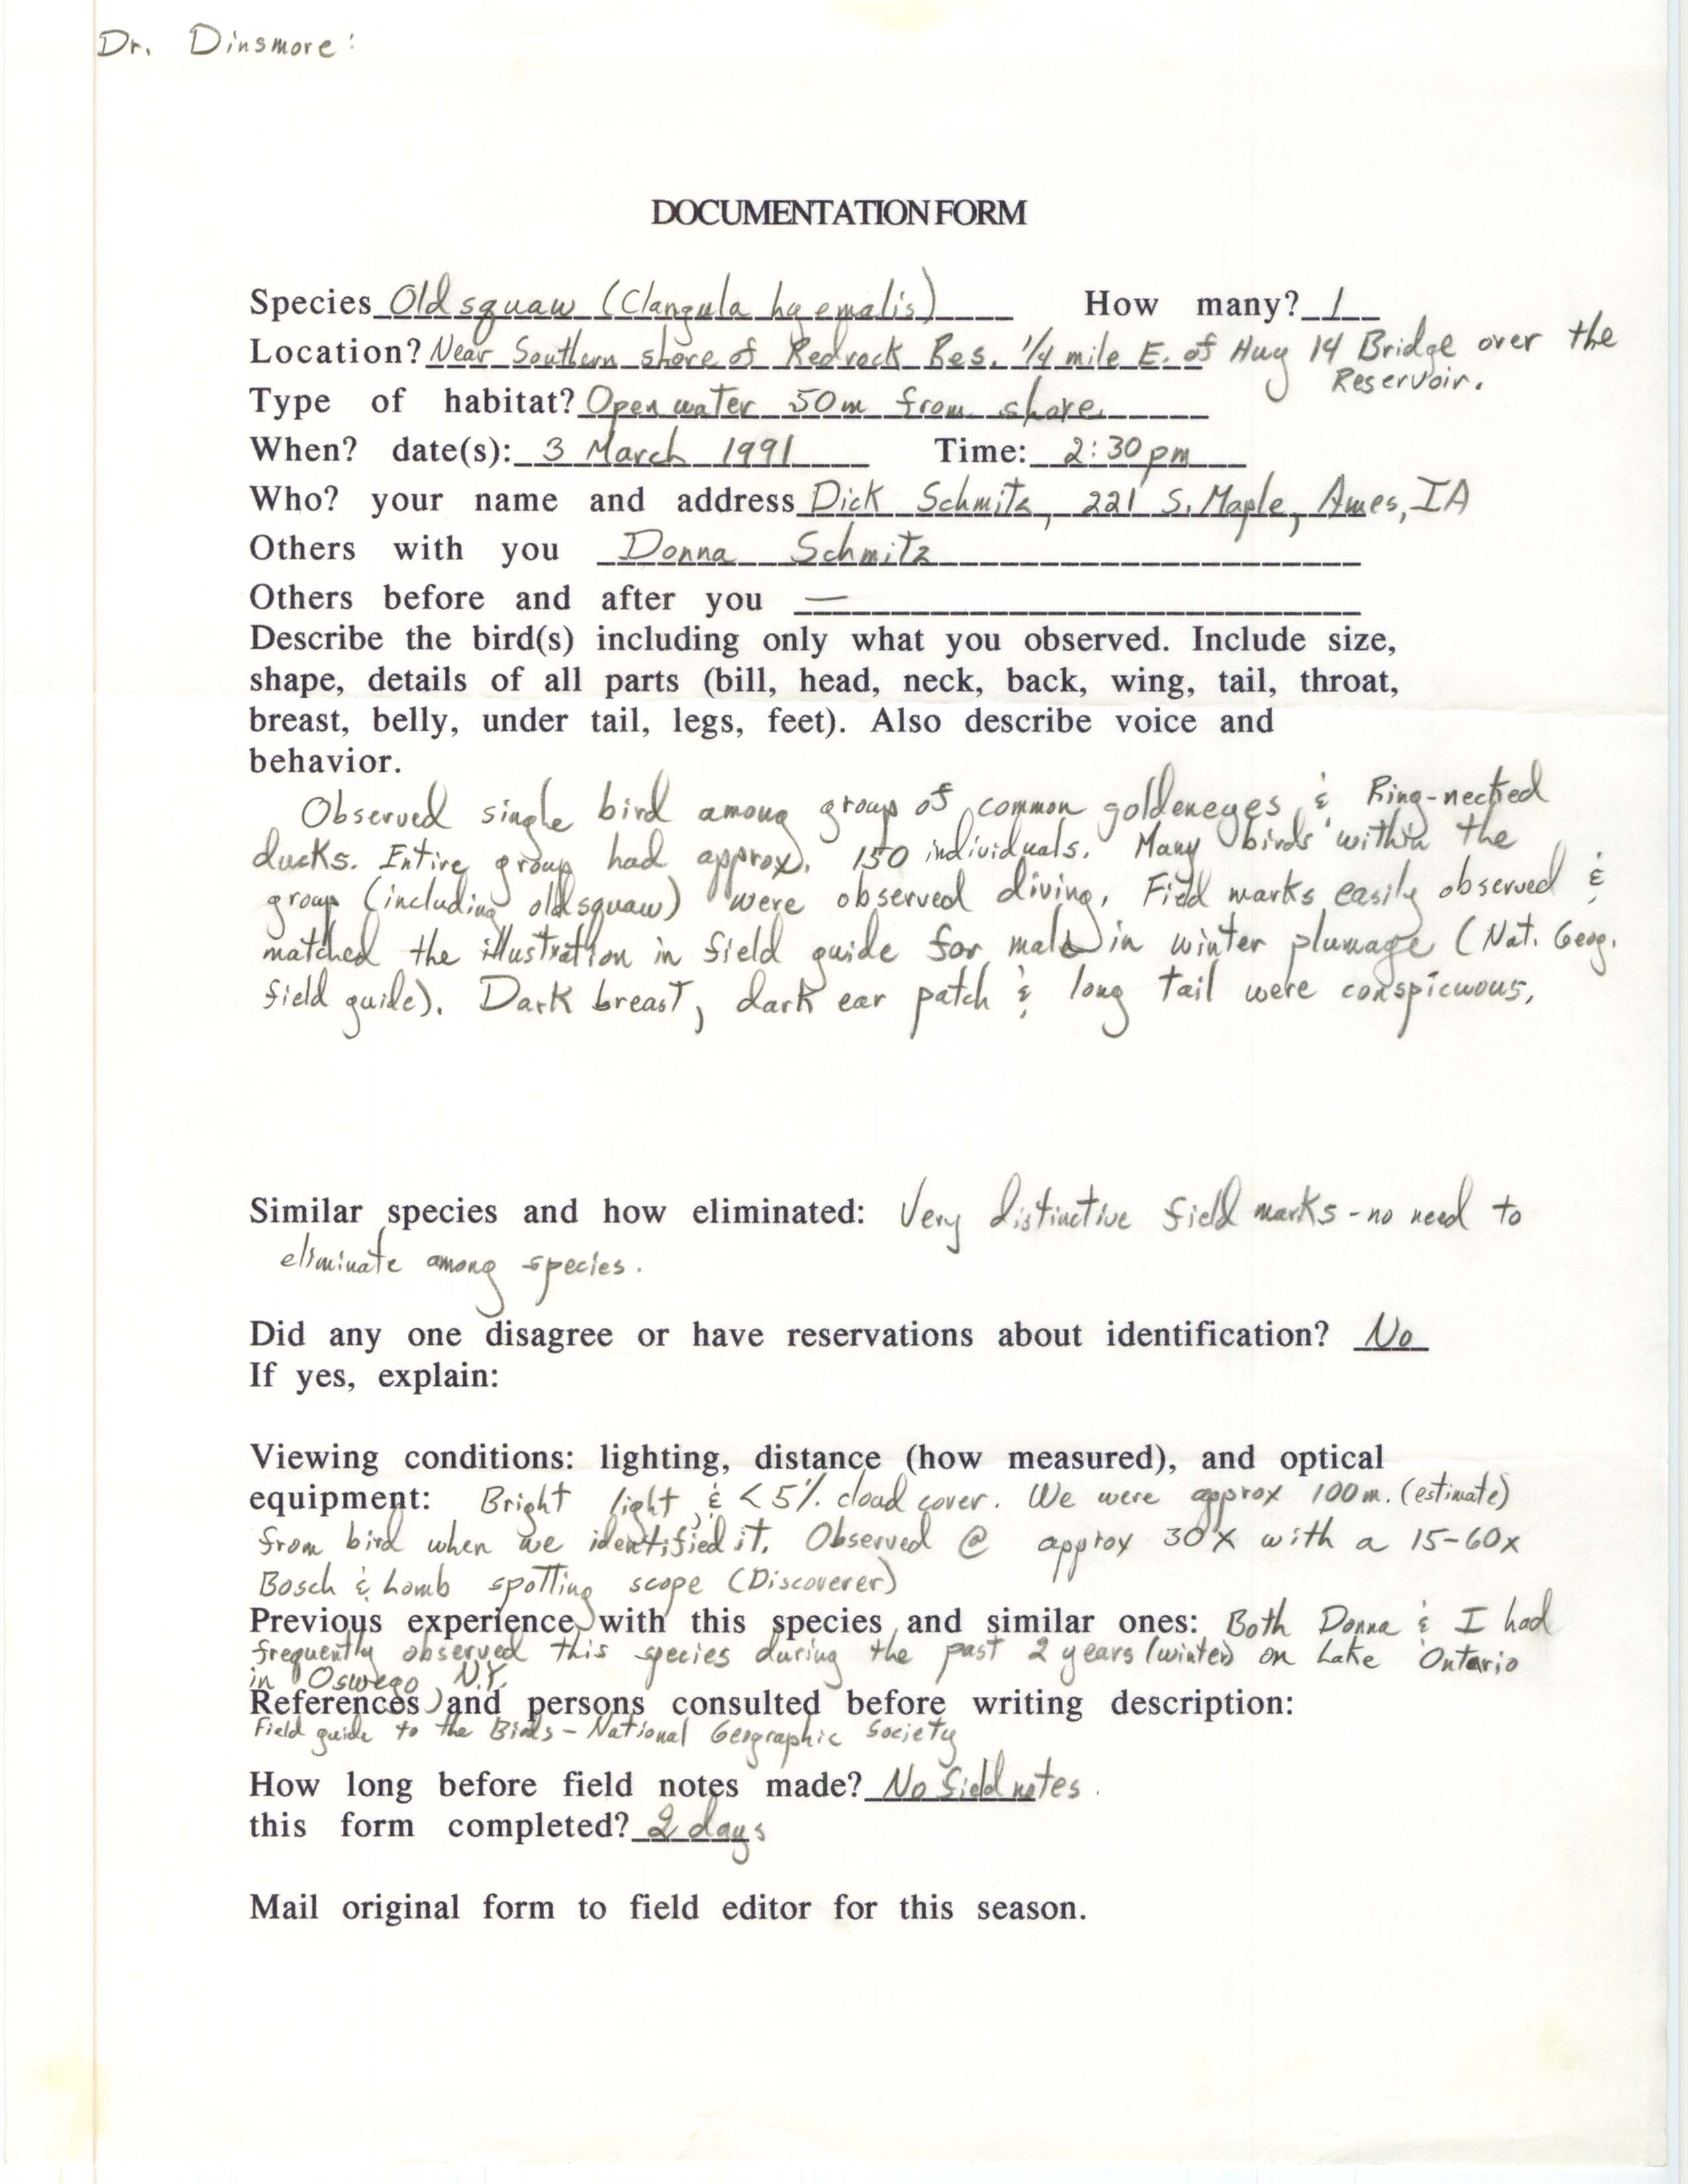 Rare bird documentation form for Long-tailed Duck at Red Rock Reservoir, 1991